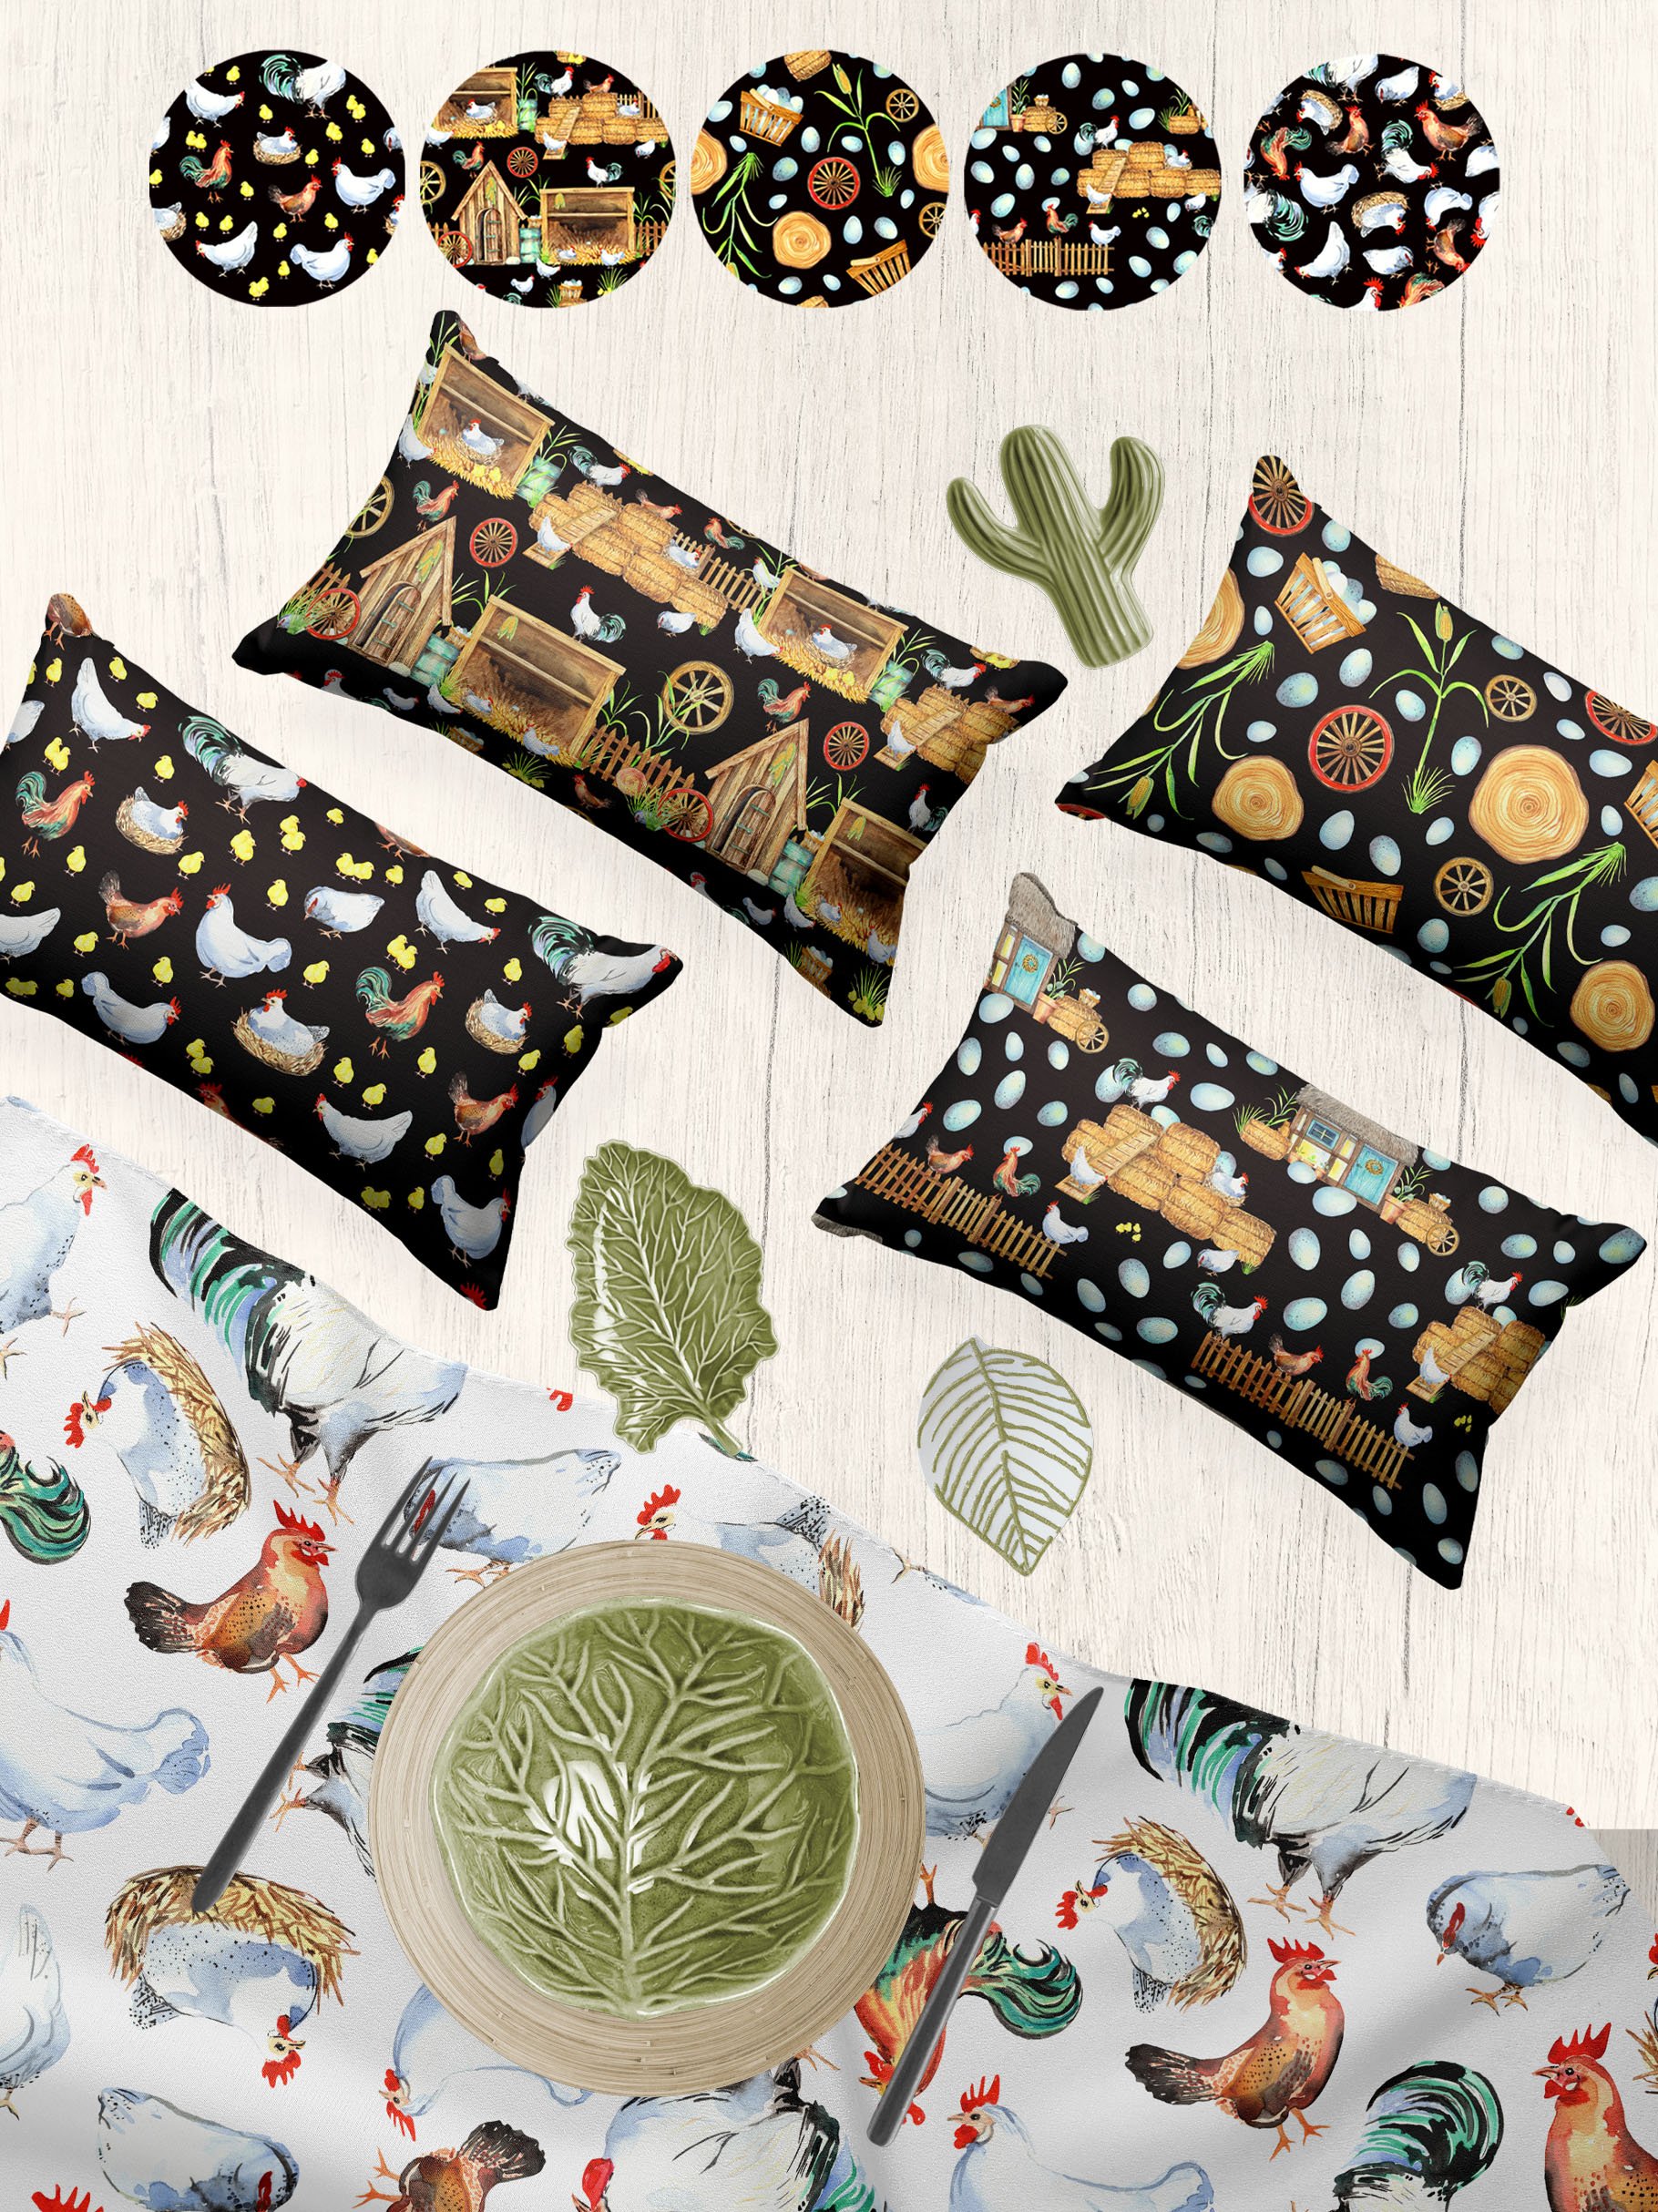 Some pillows with chicken prints.